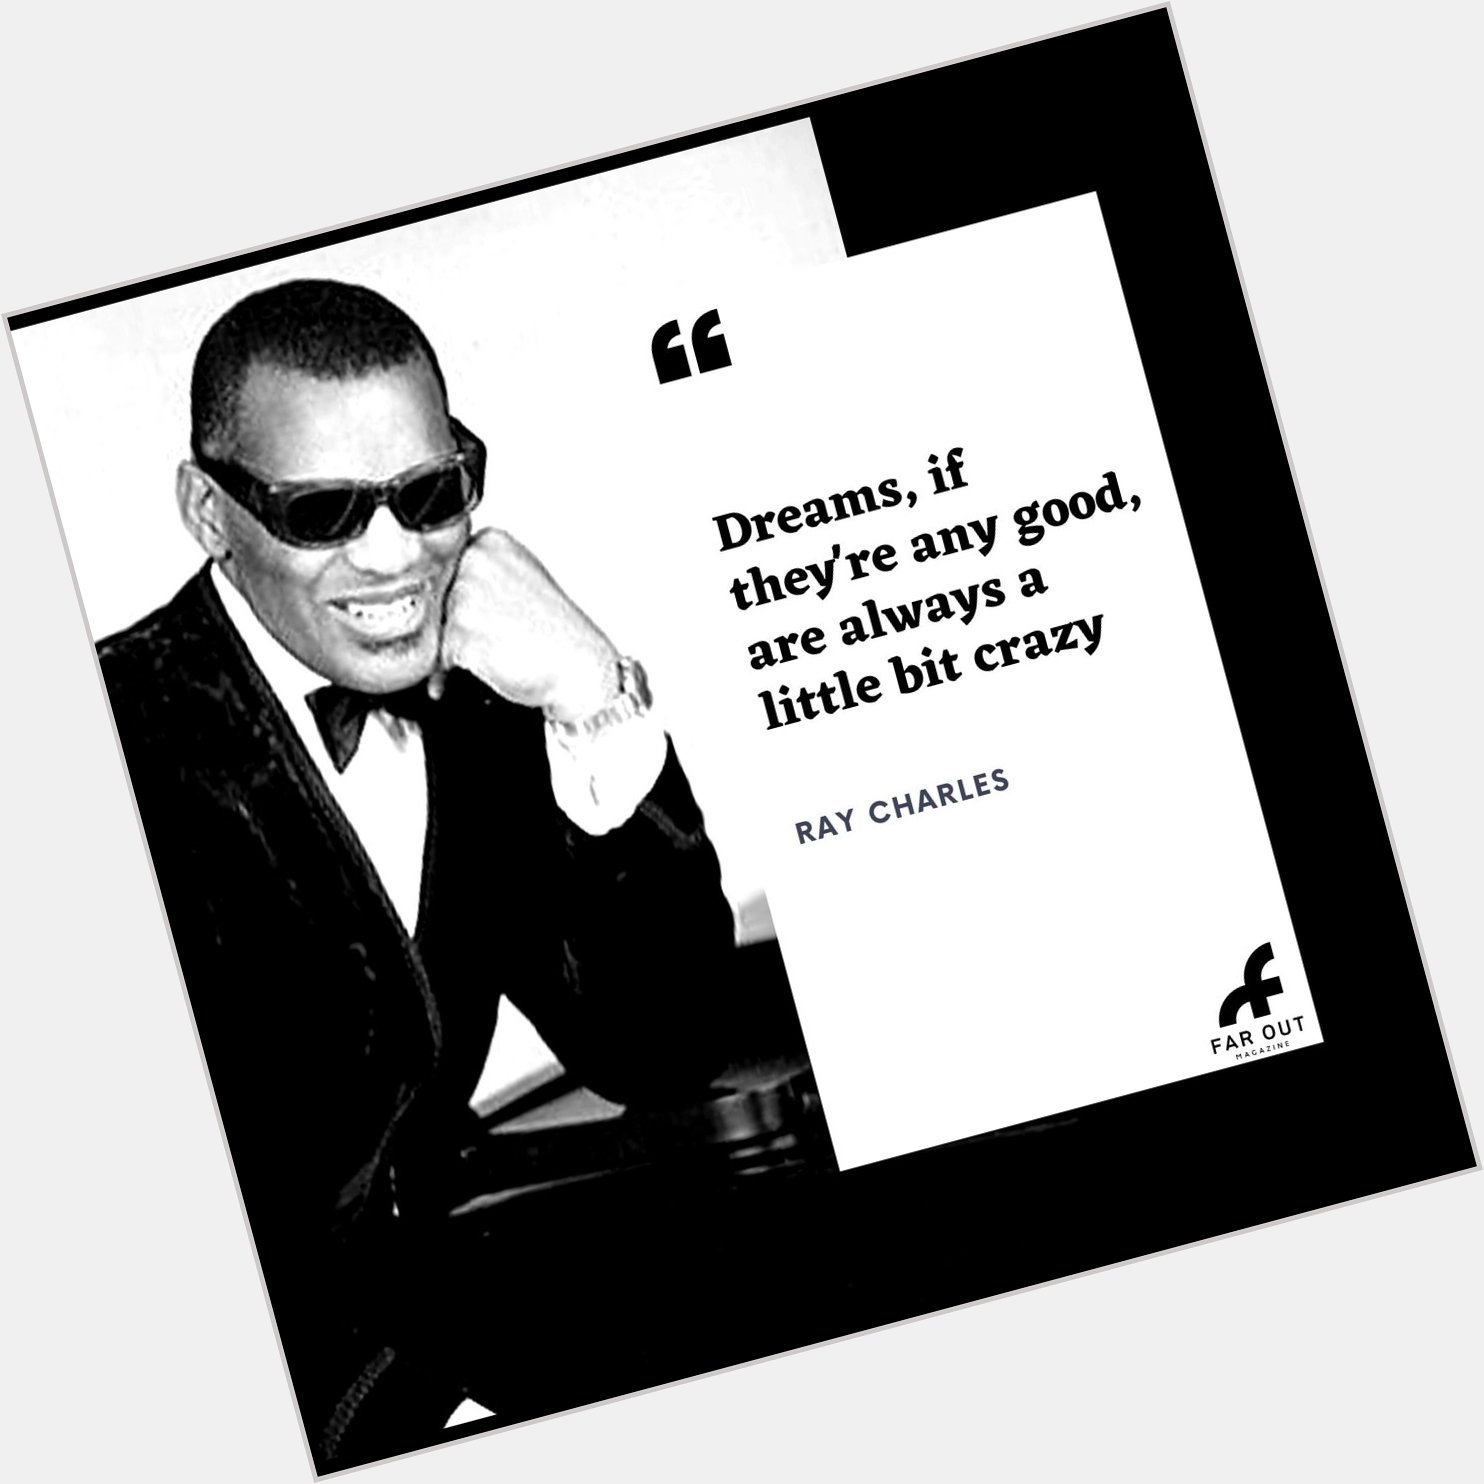 Happy birthday to legend Ray Charles! Charles died on 10th of June 2004, aged 73 